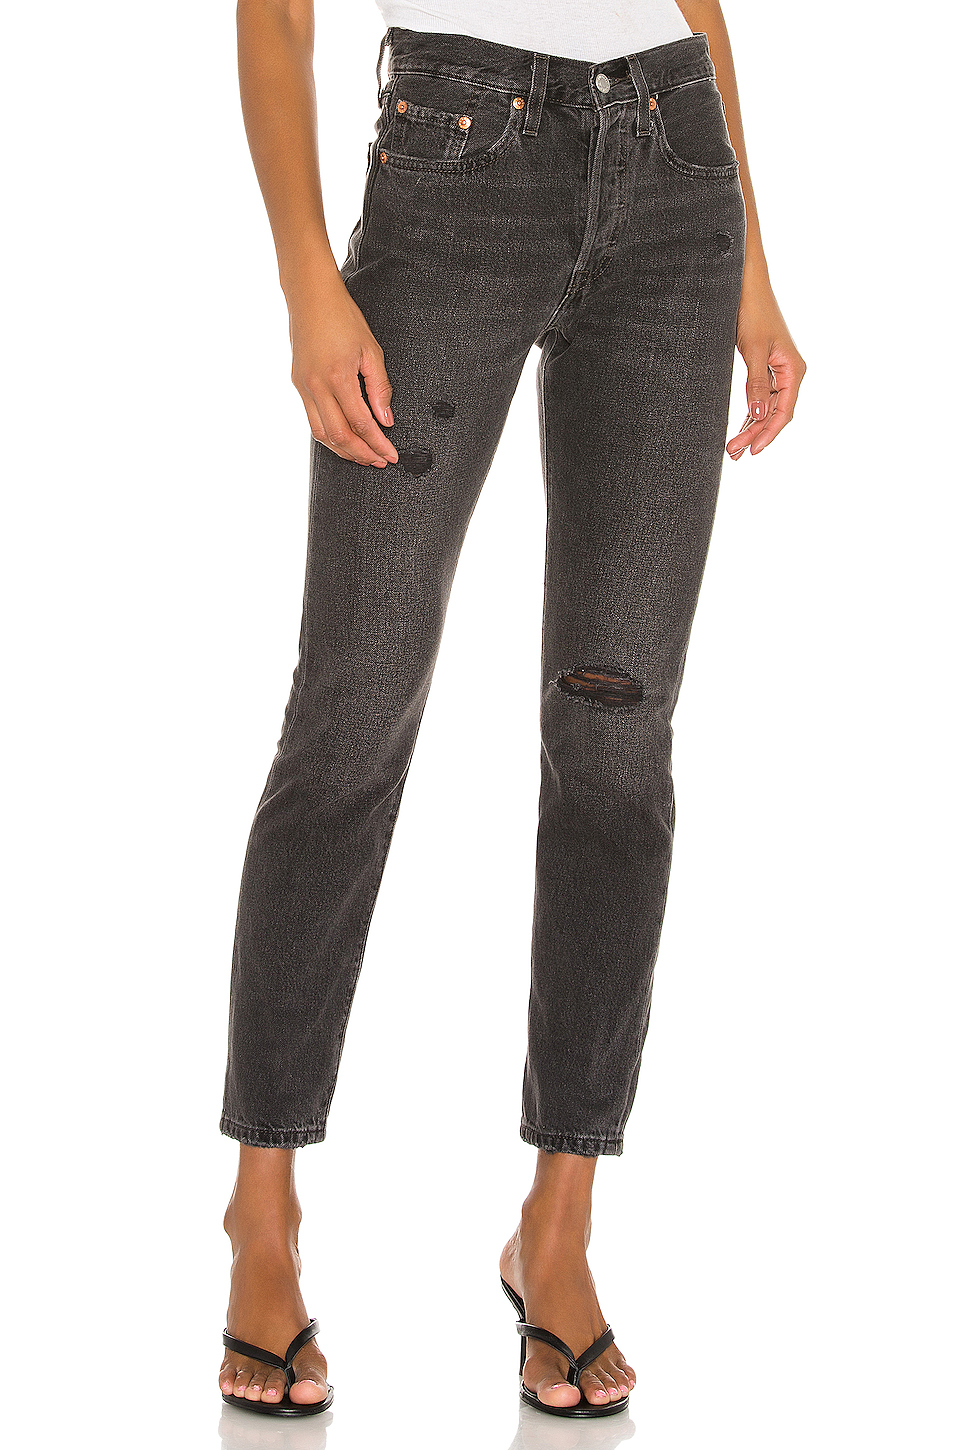 Most Popular Levi's Jeans for Women 